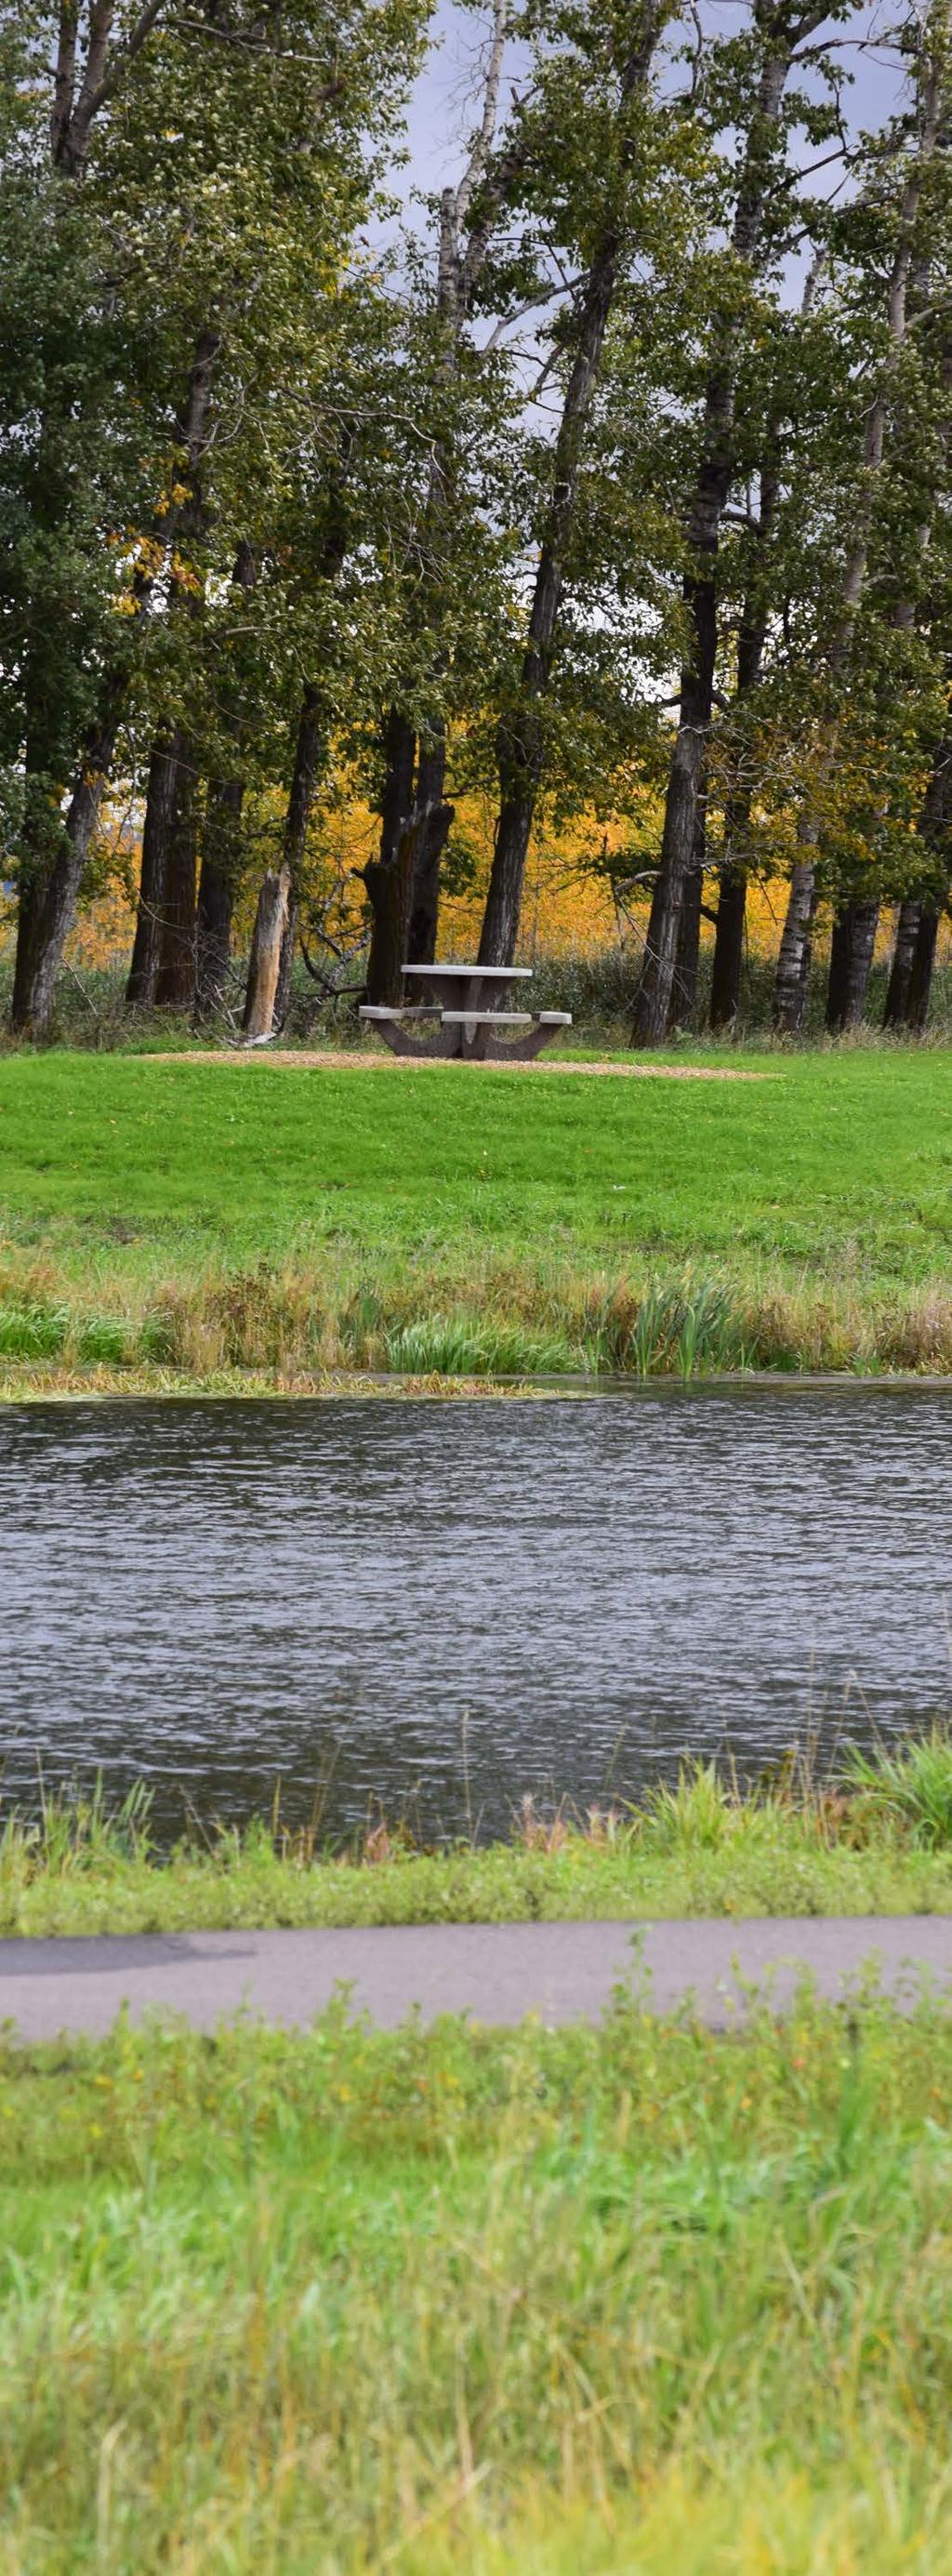 stormwater from the development, subject to Alberta Environment and Parks (AEP) approval.